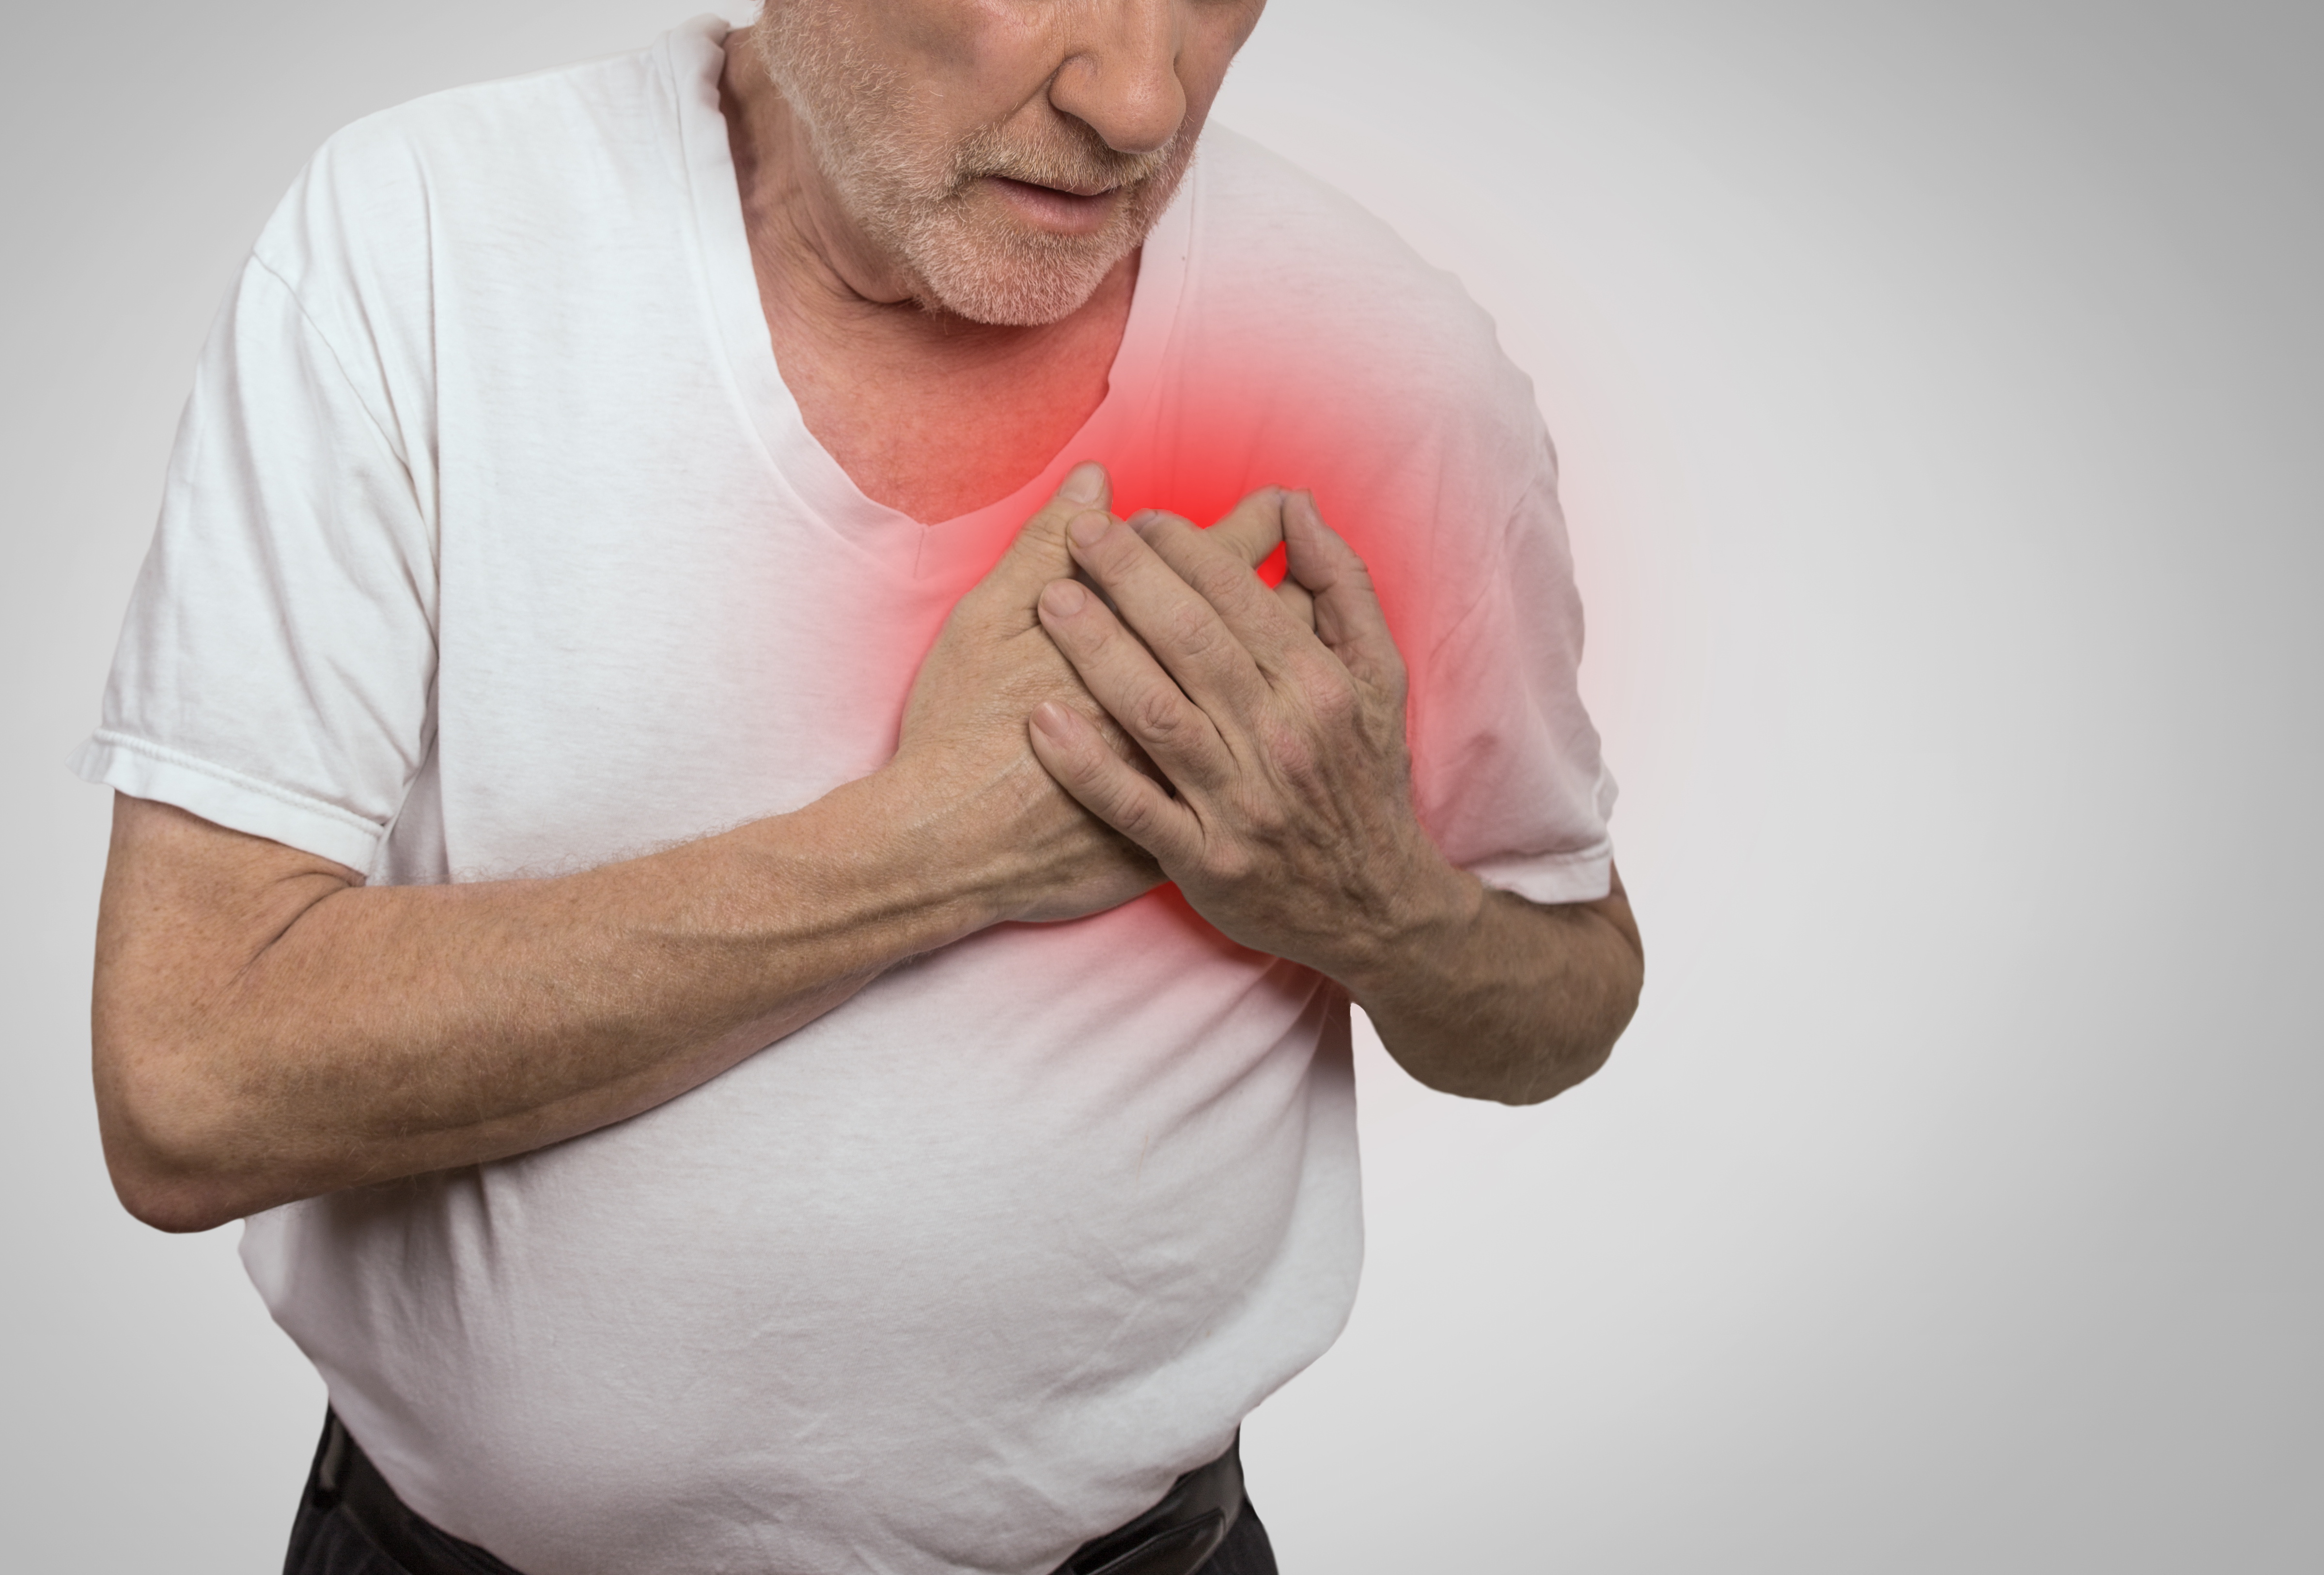 Man clutching his heart as a sign of heart attack